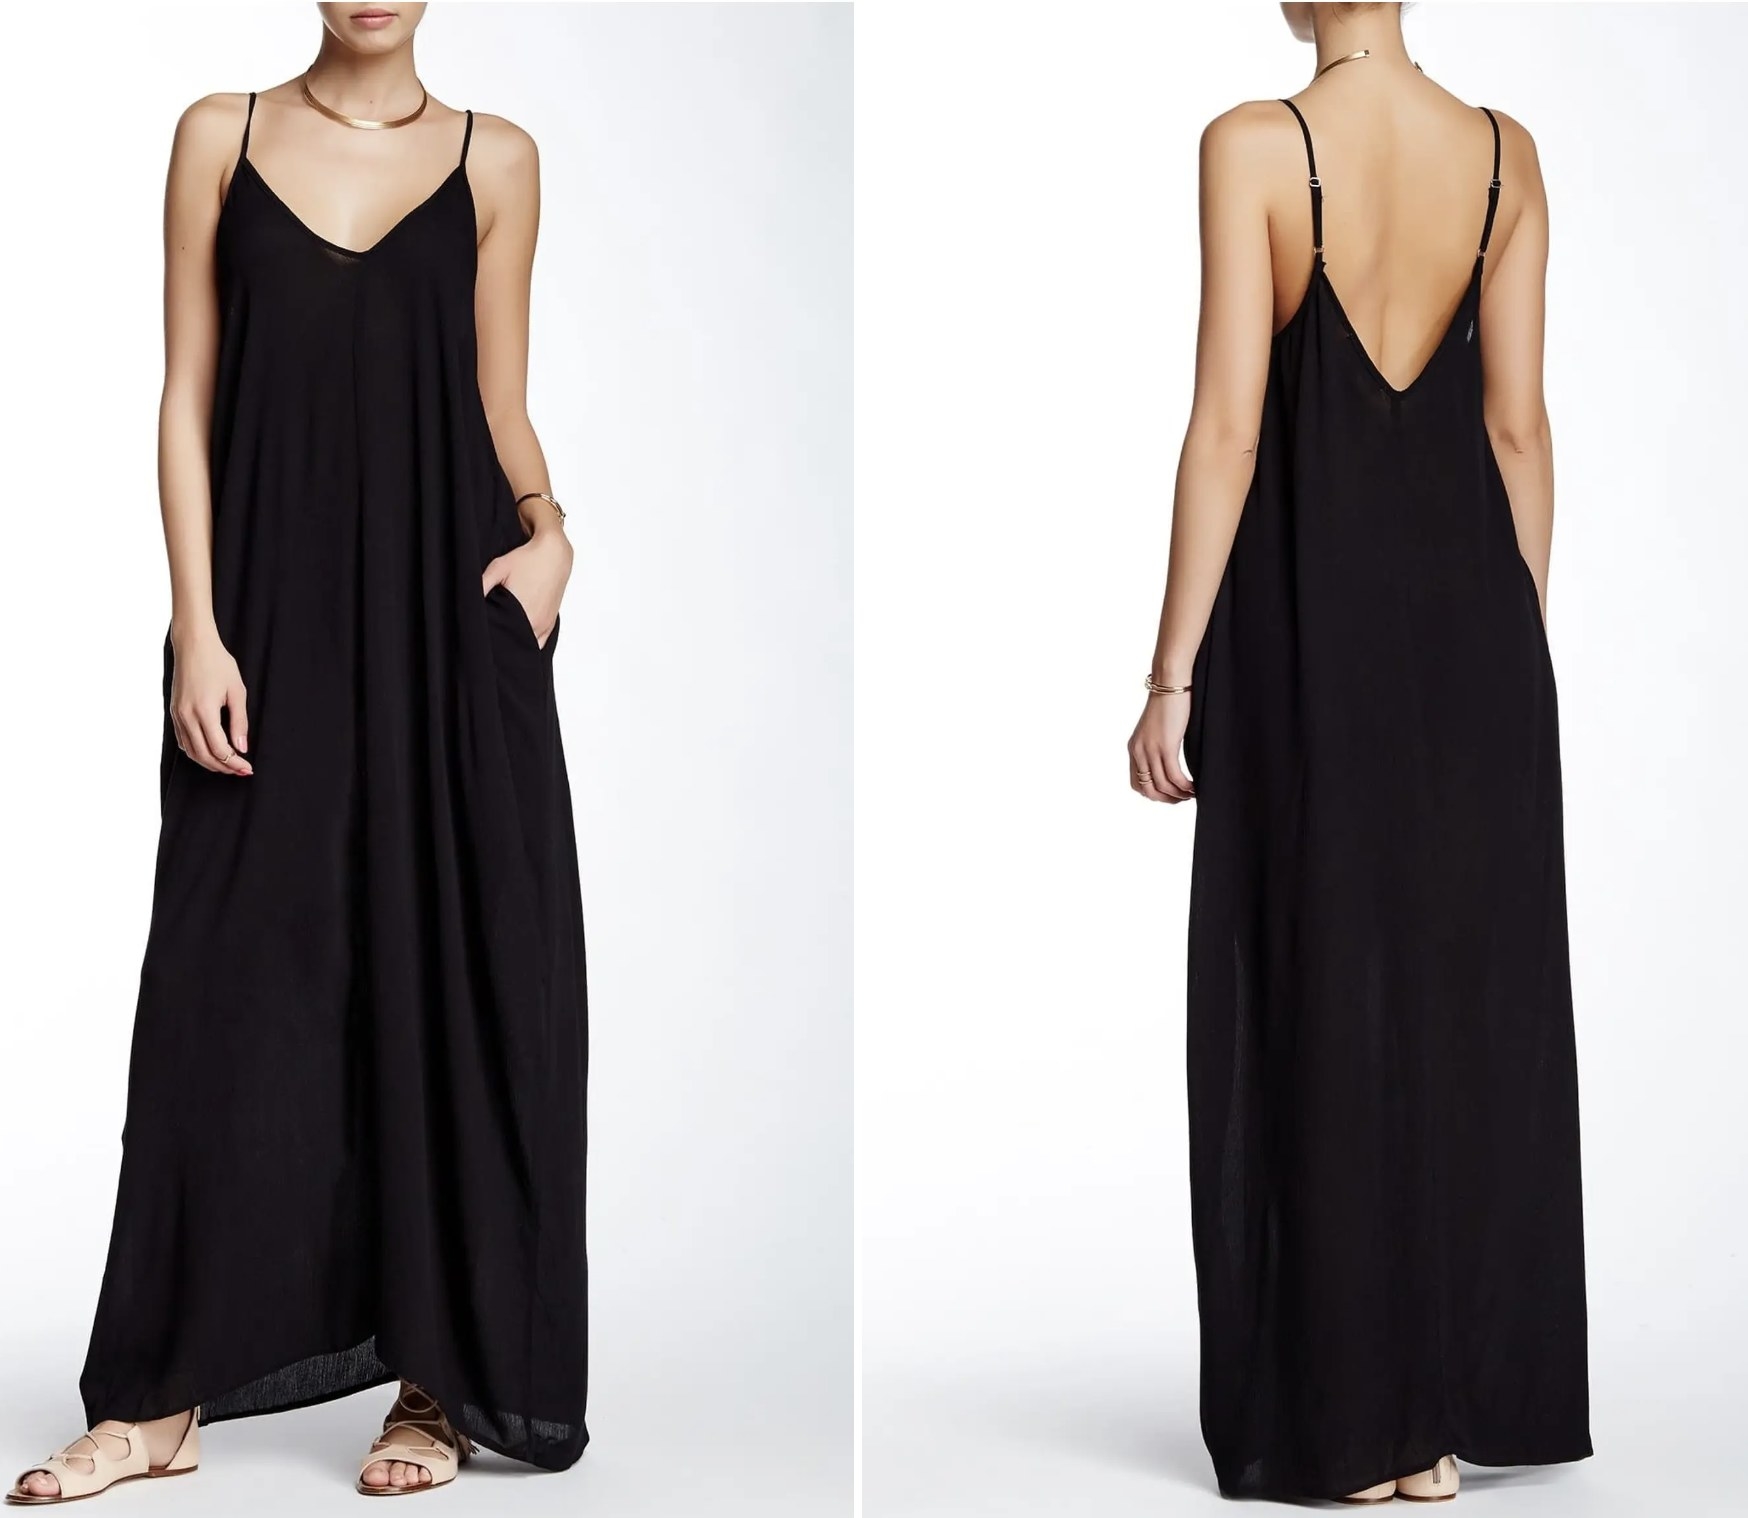 two images of same model wearing maxi dress in black